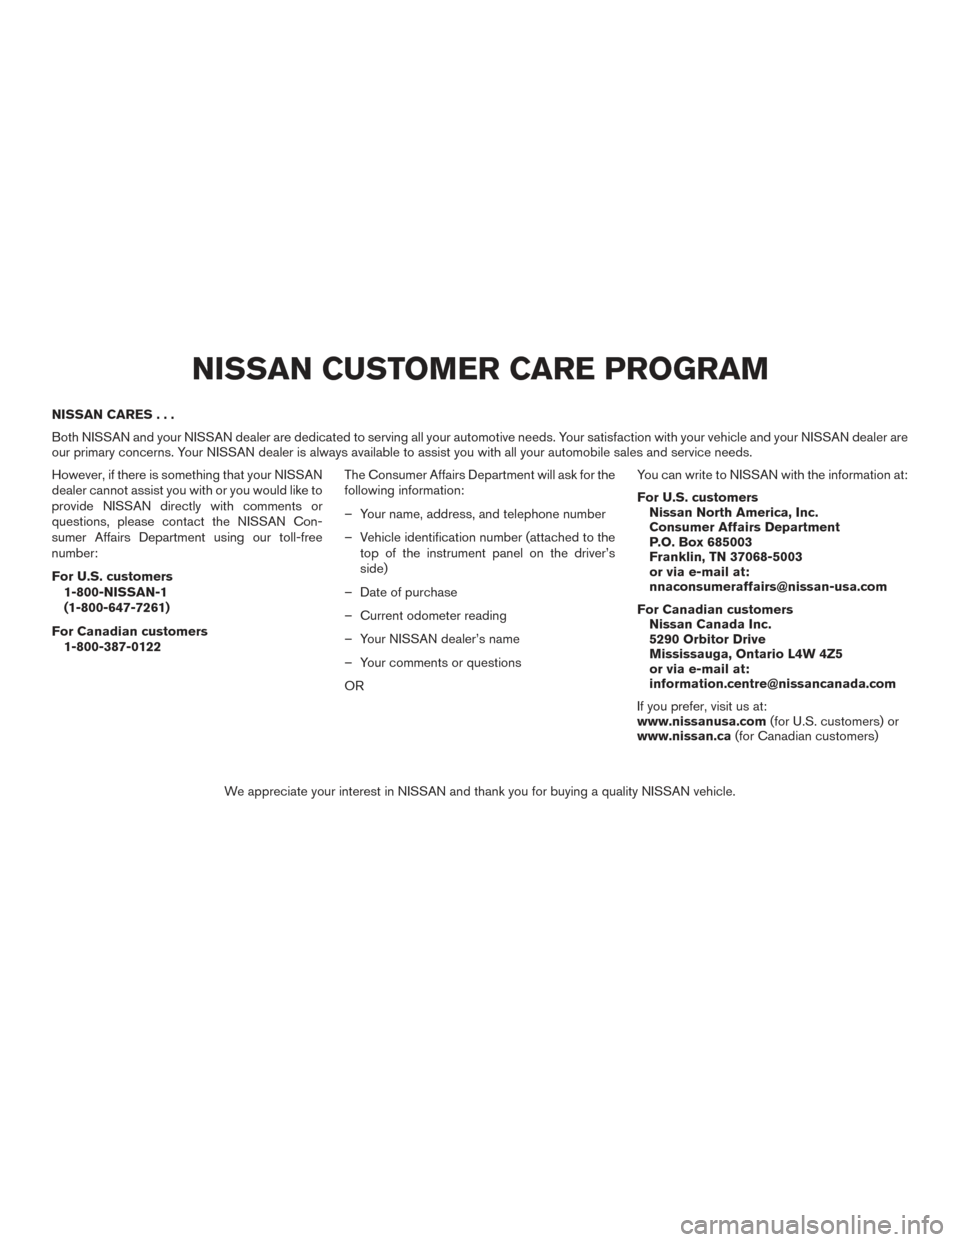 NISSAN XTERRA 2015 N50 / 2.G Owners Manual NISSAN CARES...
Both NISSAN and your NISSAN dealer are dedicated to serving all your automotive needs. Your satisfaction with your vehicle and your NISSAN dealer are
our primary concerns. Your NISSAN 